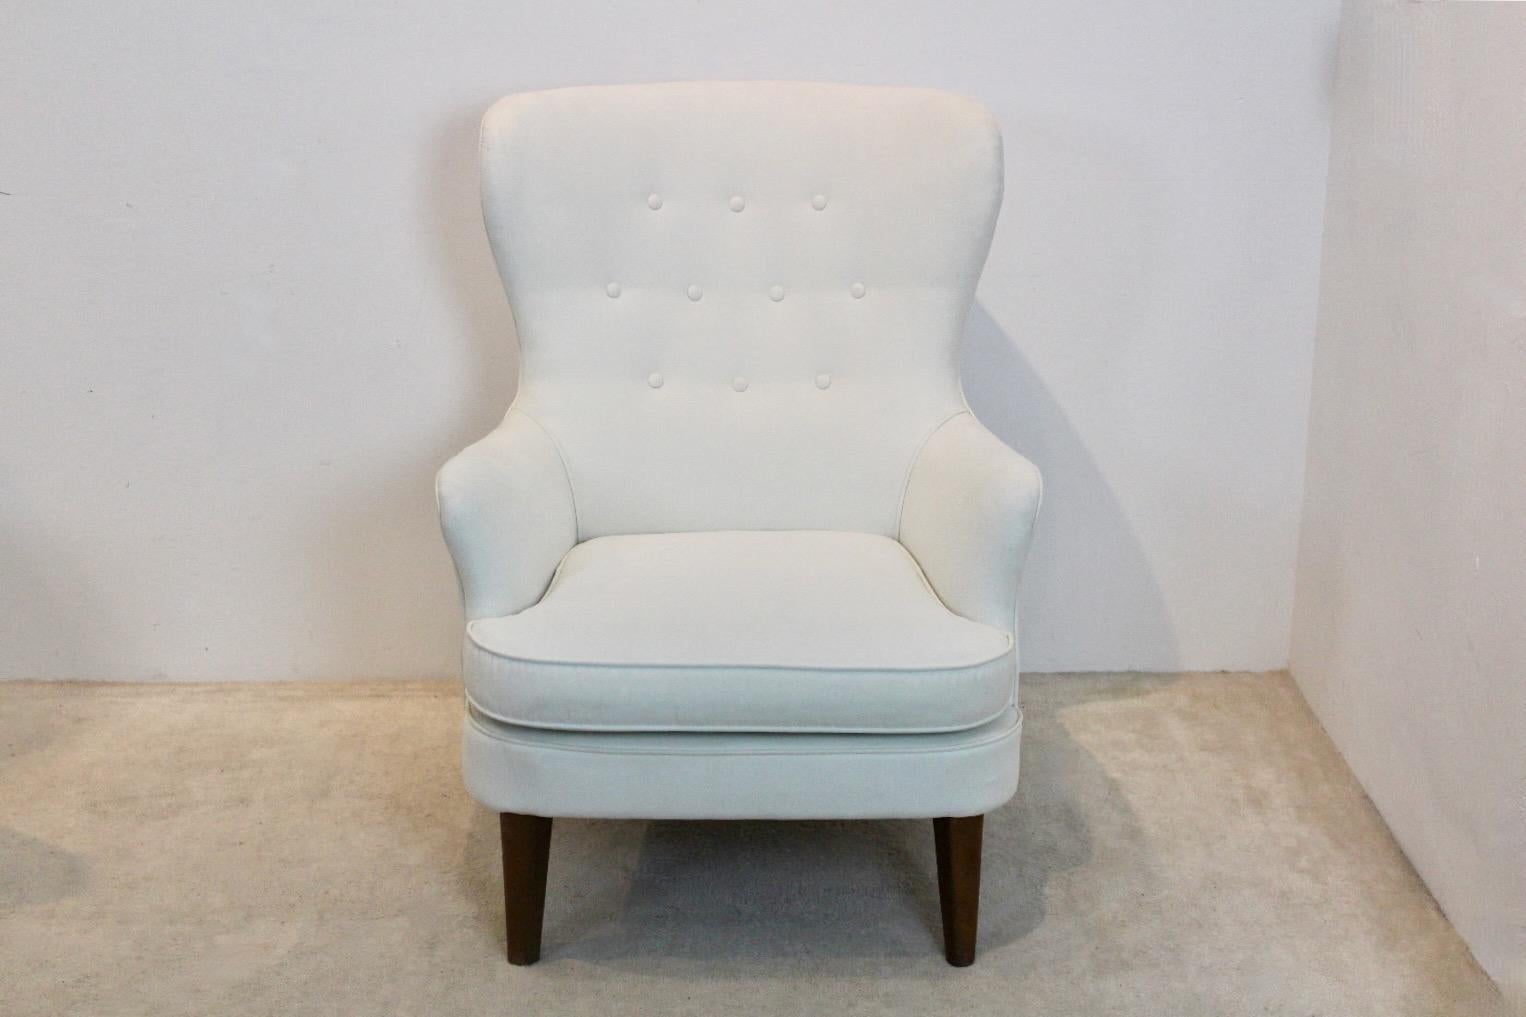 Beautiful Artifort Cocktail Chair, designed by Theo Ruth in the early 1950s. The chair is in unique condition with beautiful snow-white Alcantara upholstery in very good condition. This chair is the so called ‘Gentleman’s chair’. We also have a